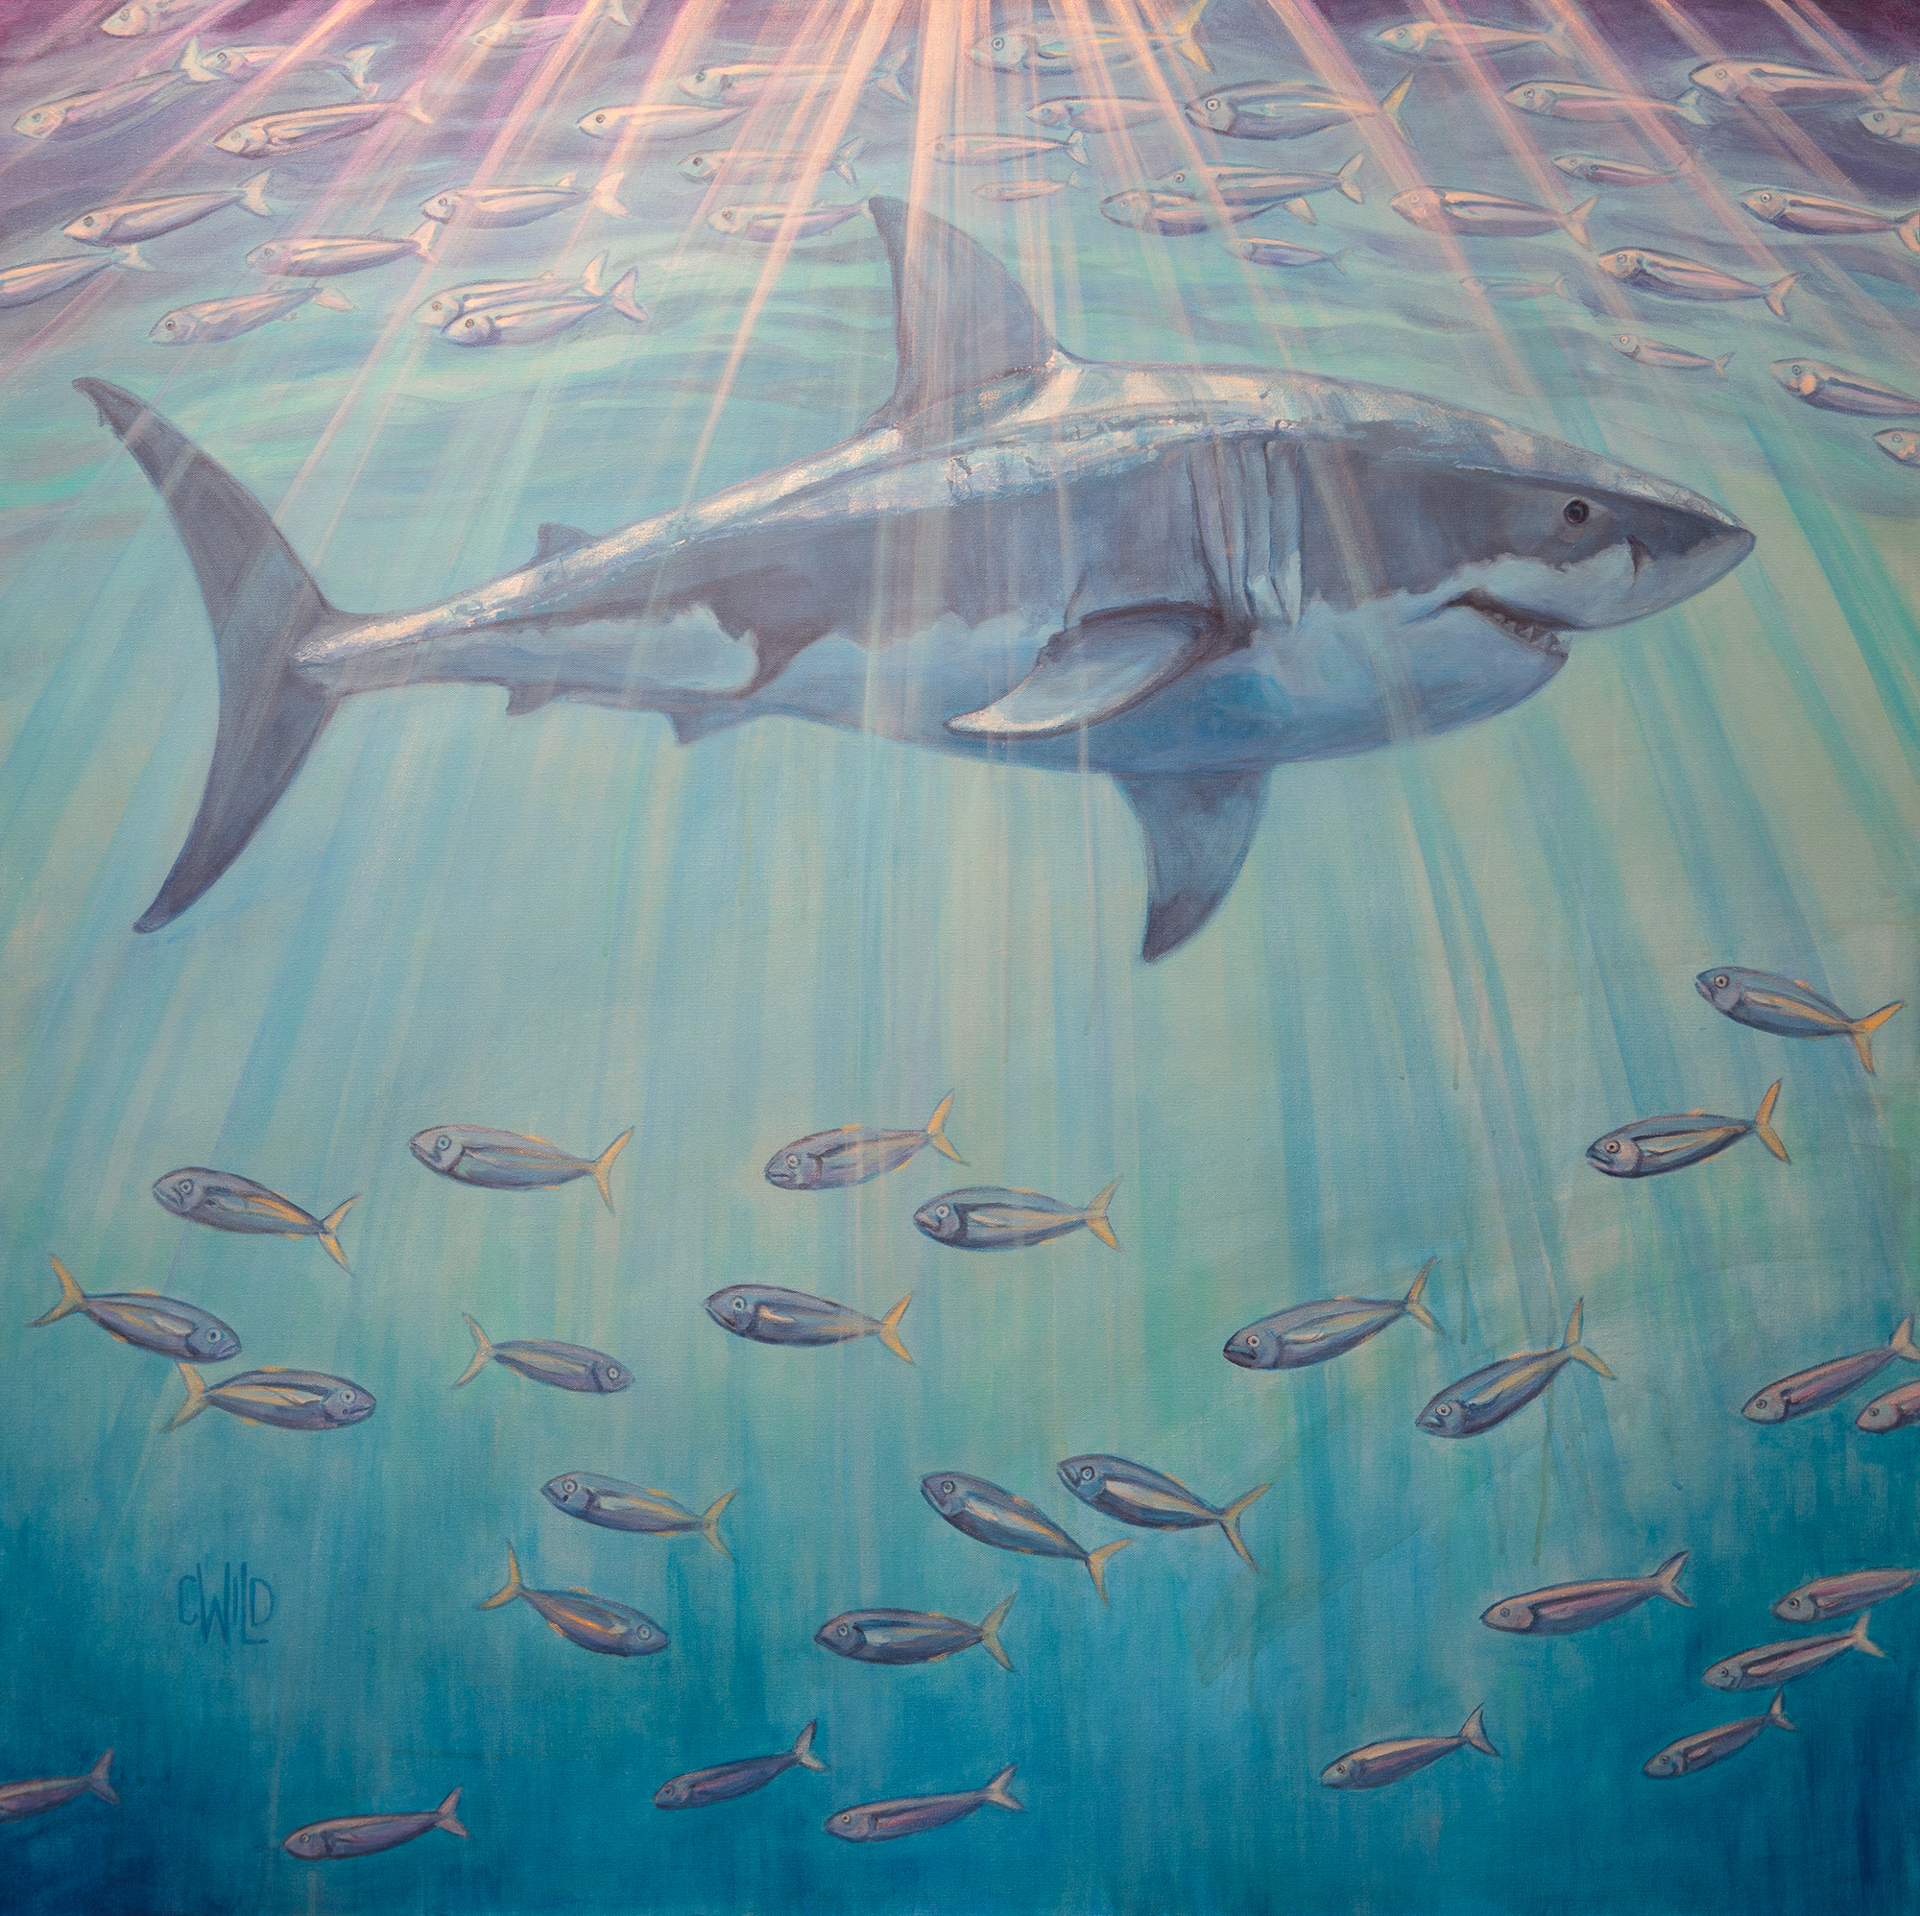 Acrylic And Silver Leaf Painting Of A Great White Shark Swimming Through A School Of Fish With Bright Light Rays Coming Down, Contemporary Fine Art By Carrie Wild